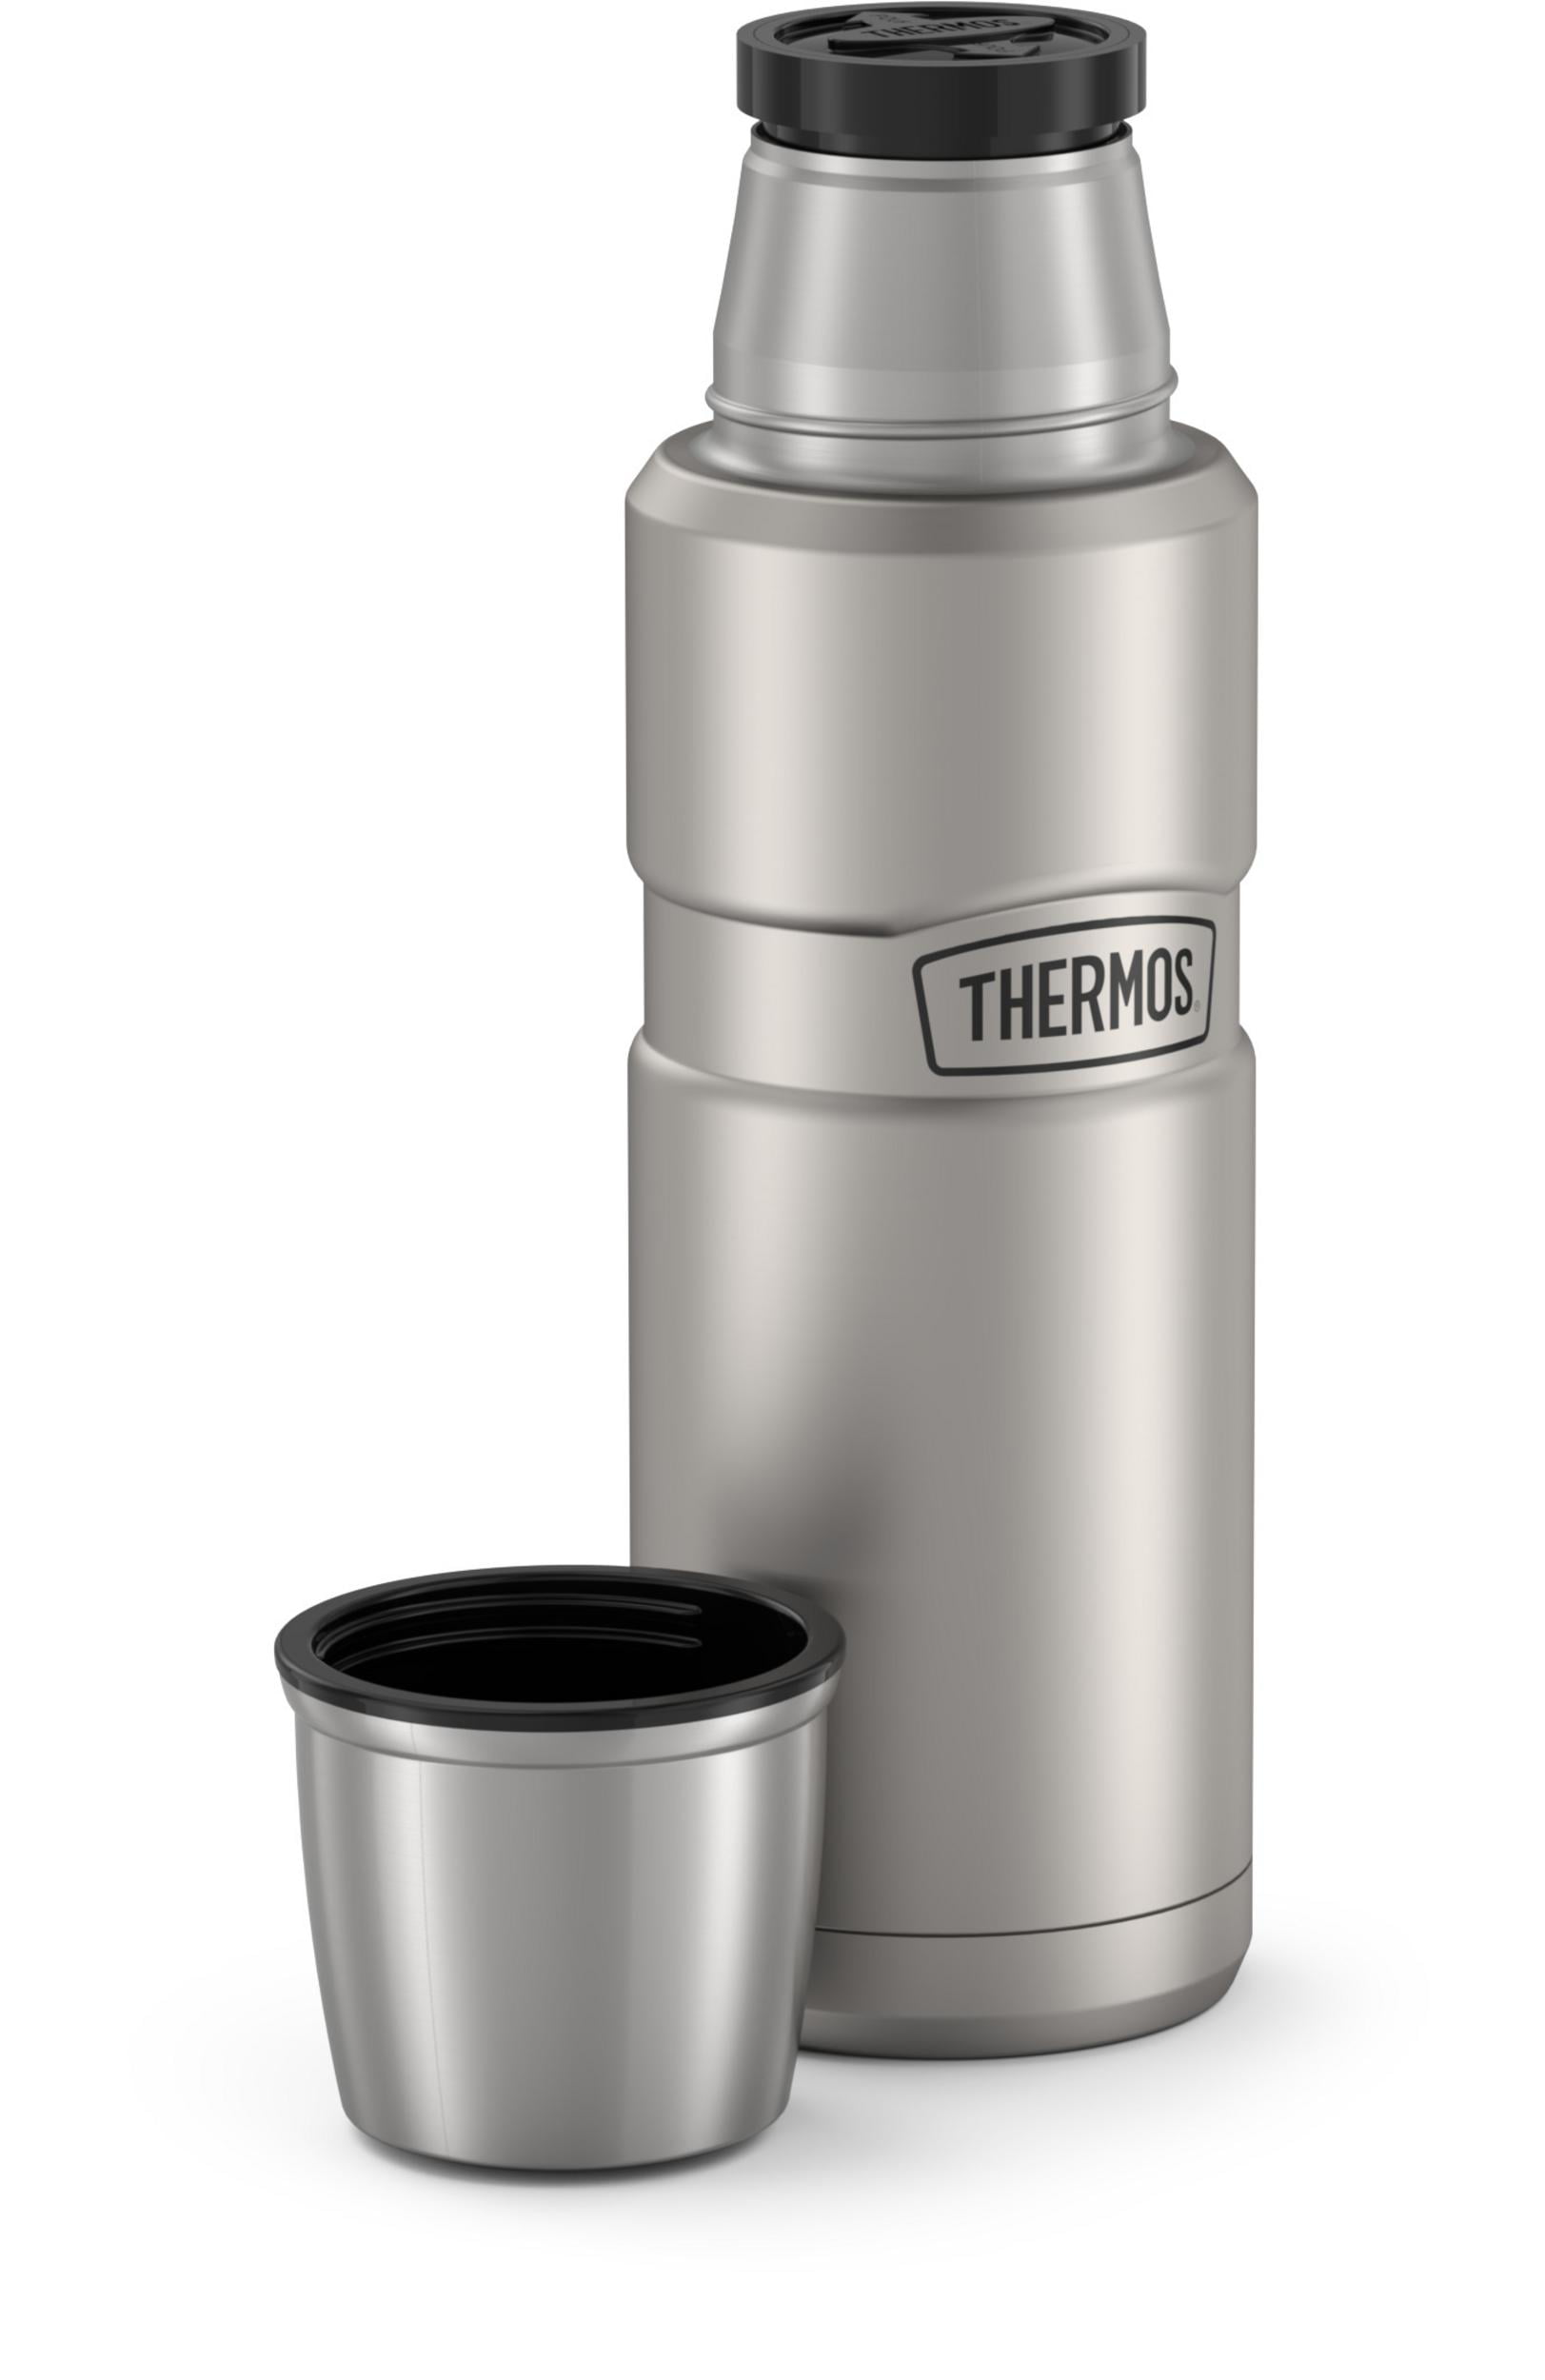 Thermos 16 oz Stainless King Vacuum Insulated Stainless Steel Compact Bottle 